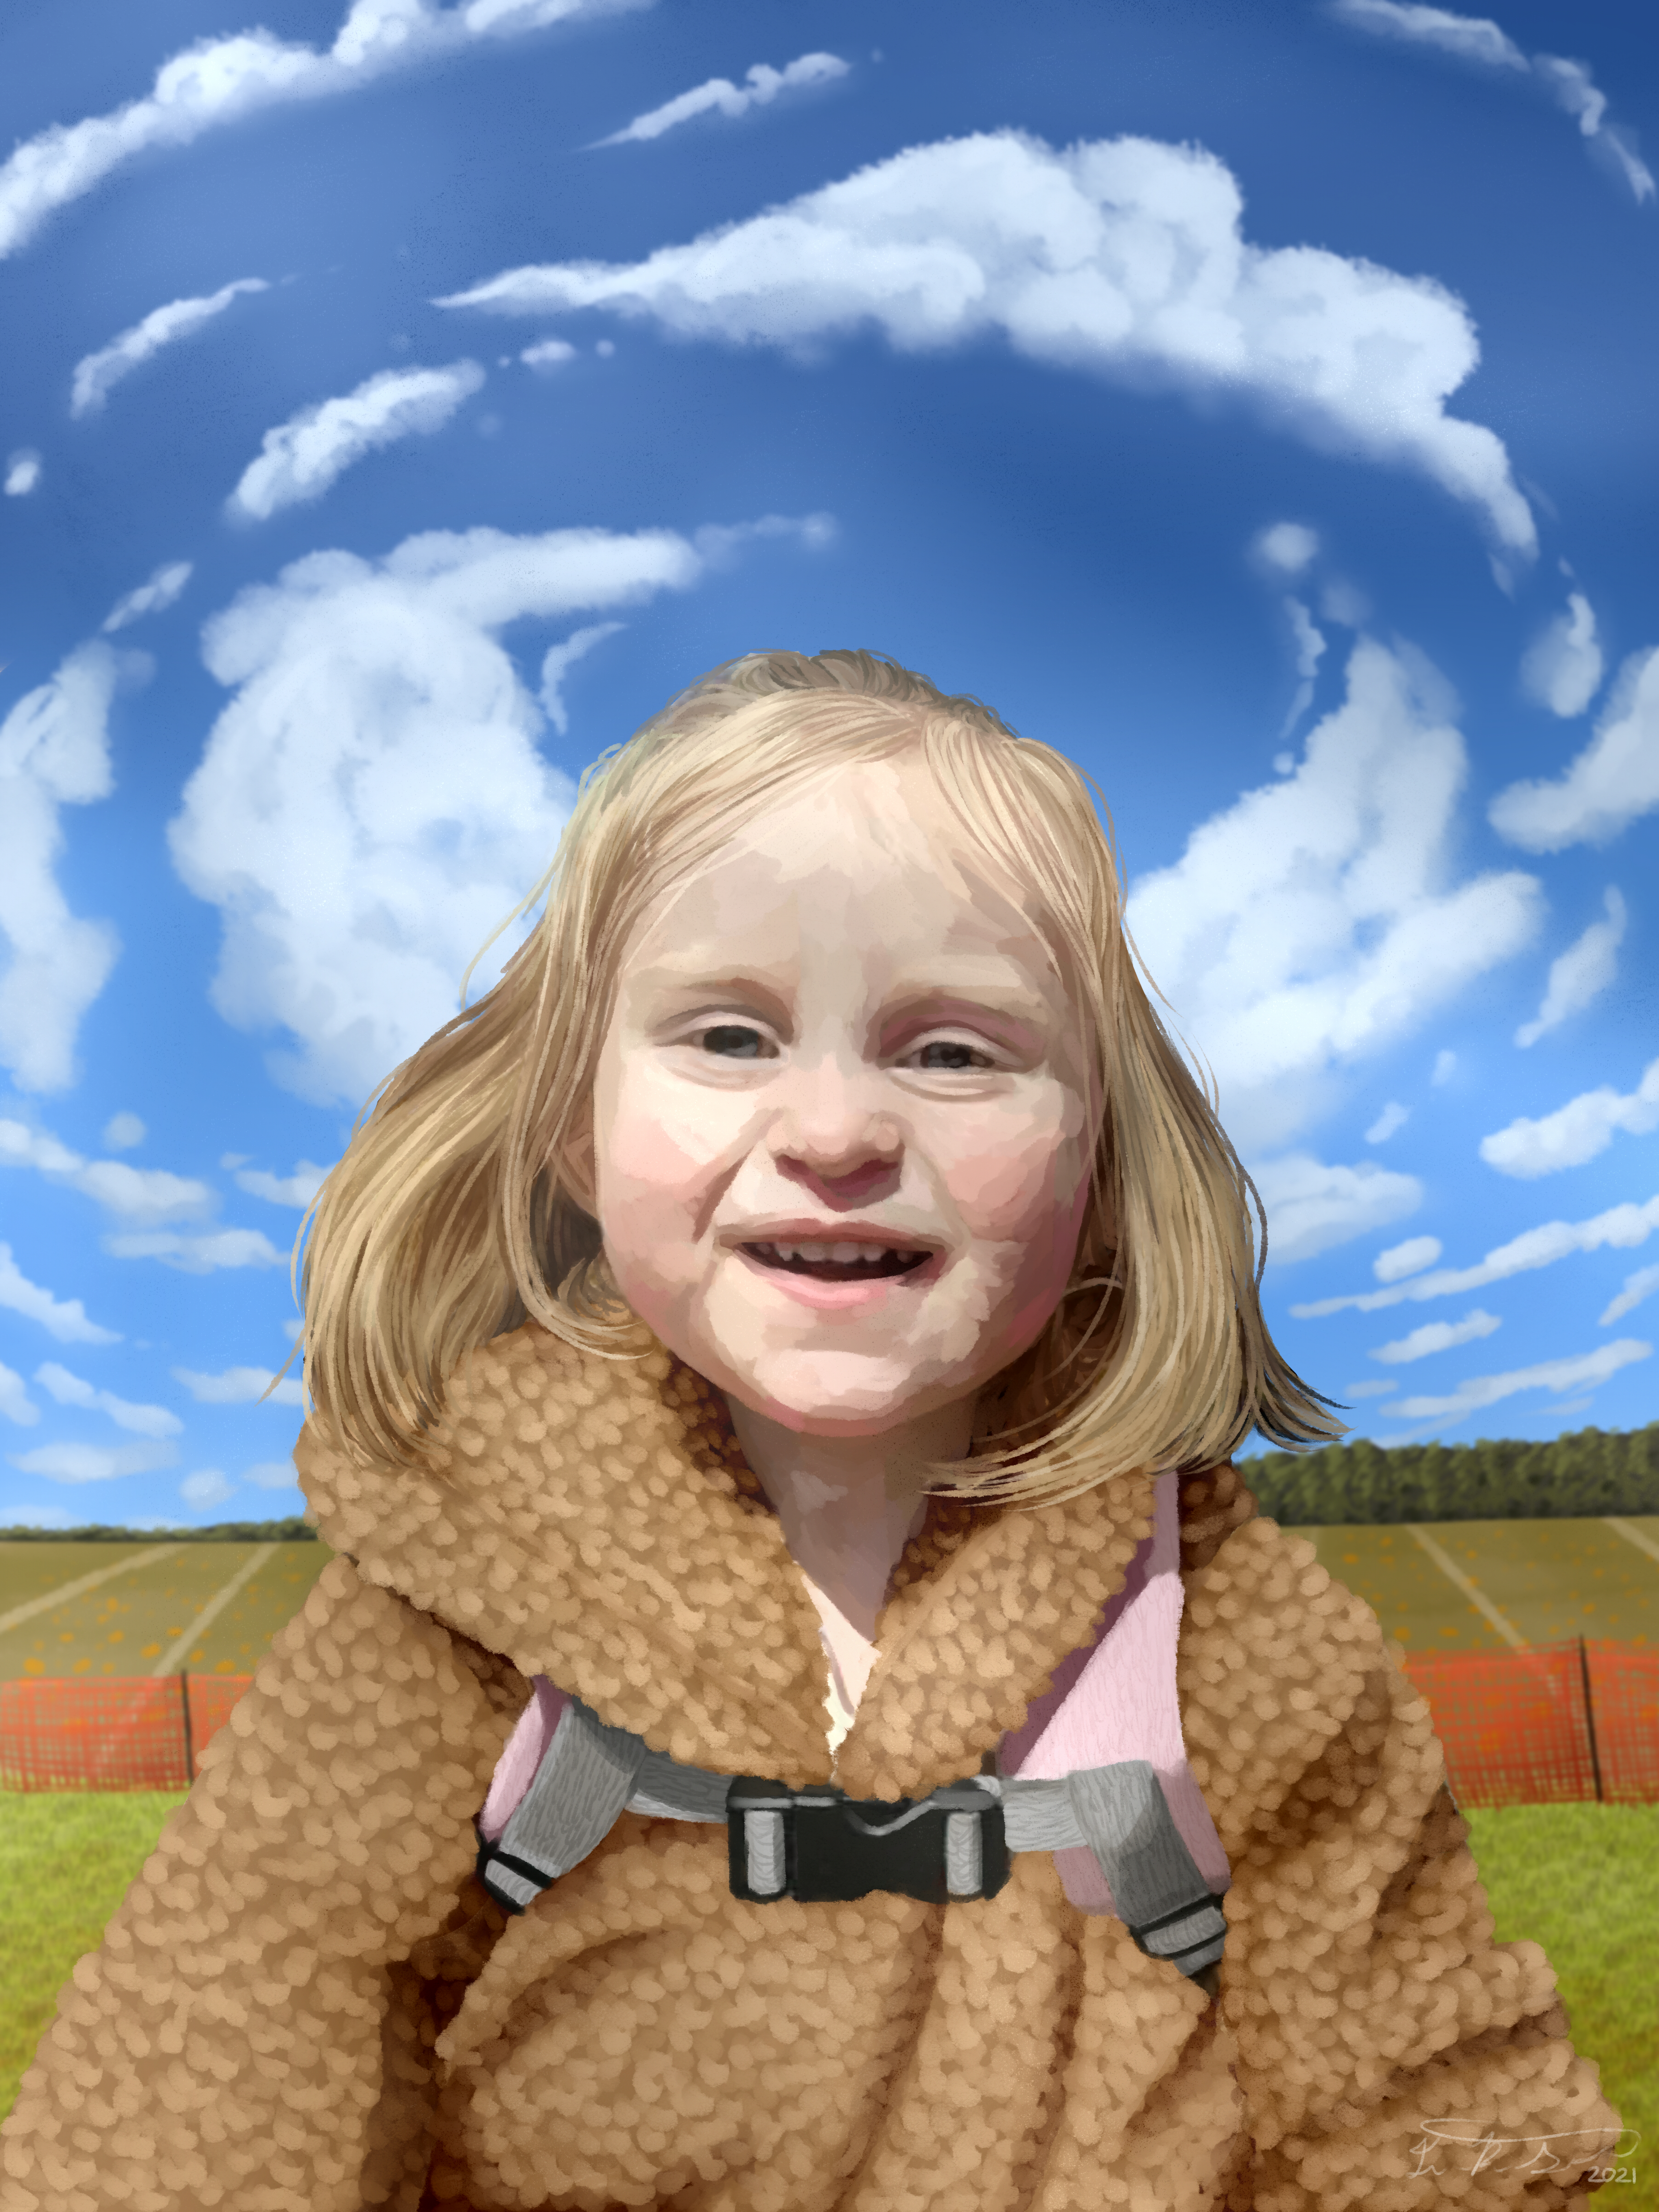 Another painting of my niece, this time as a two year old. She's wearing a fluffy brown coat and pink backpack. She's smiling at the camera in front of a pumpkin field and a bright blue sky, with the clouds circling her head as if it were a halo.